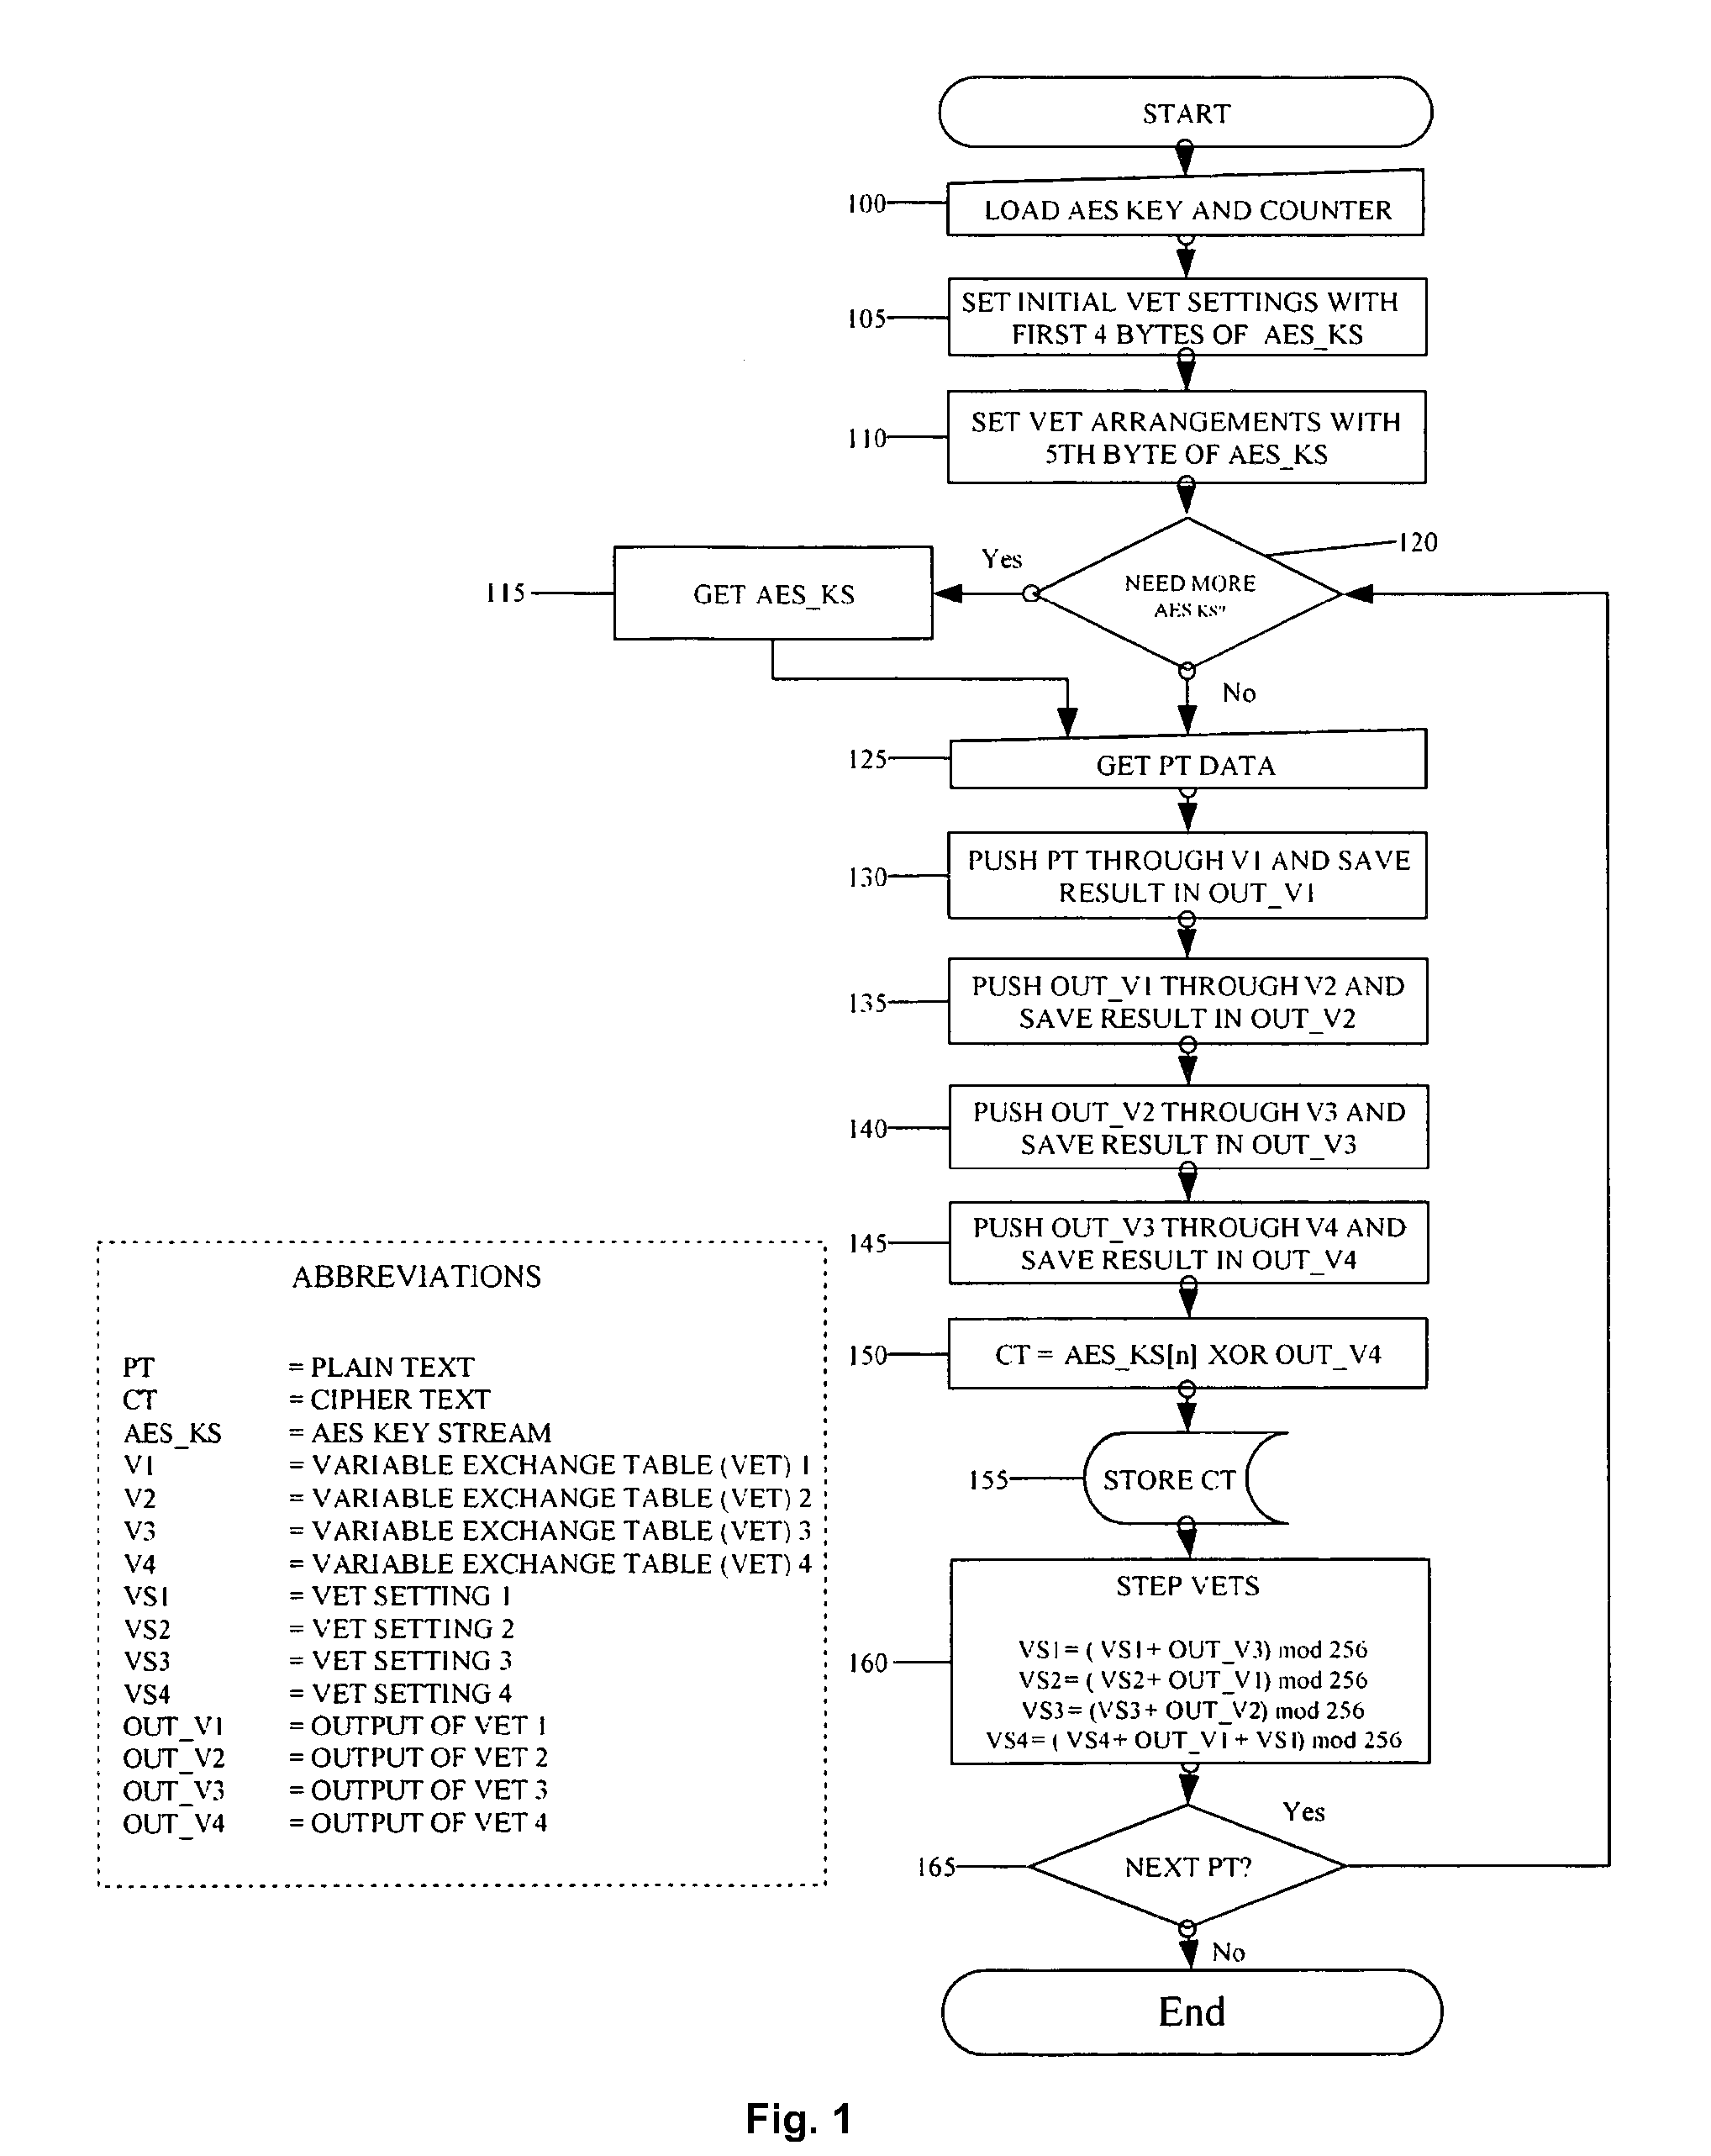 System for encrypting and decrypting a plaintext message with authentication